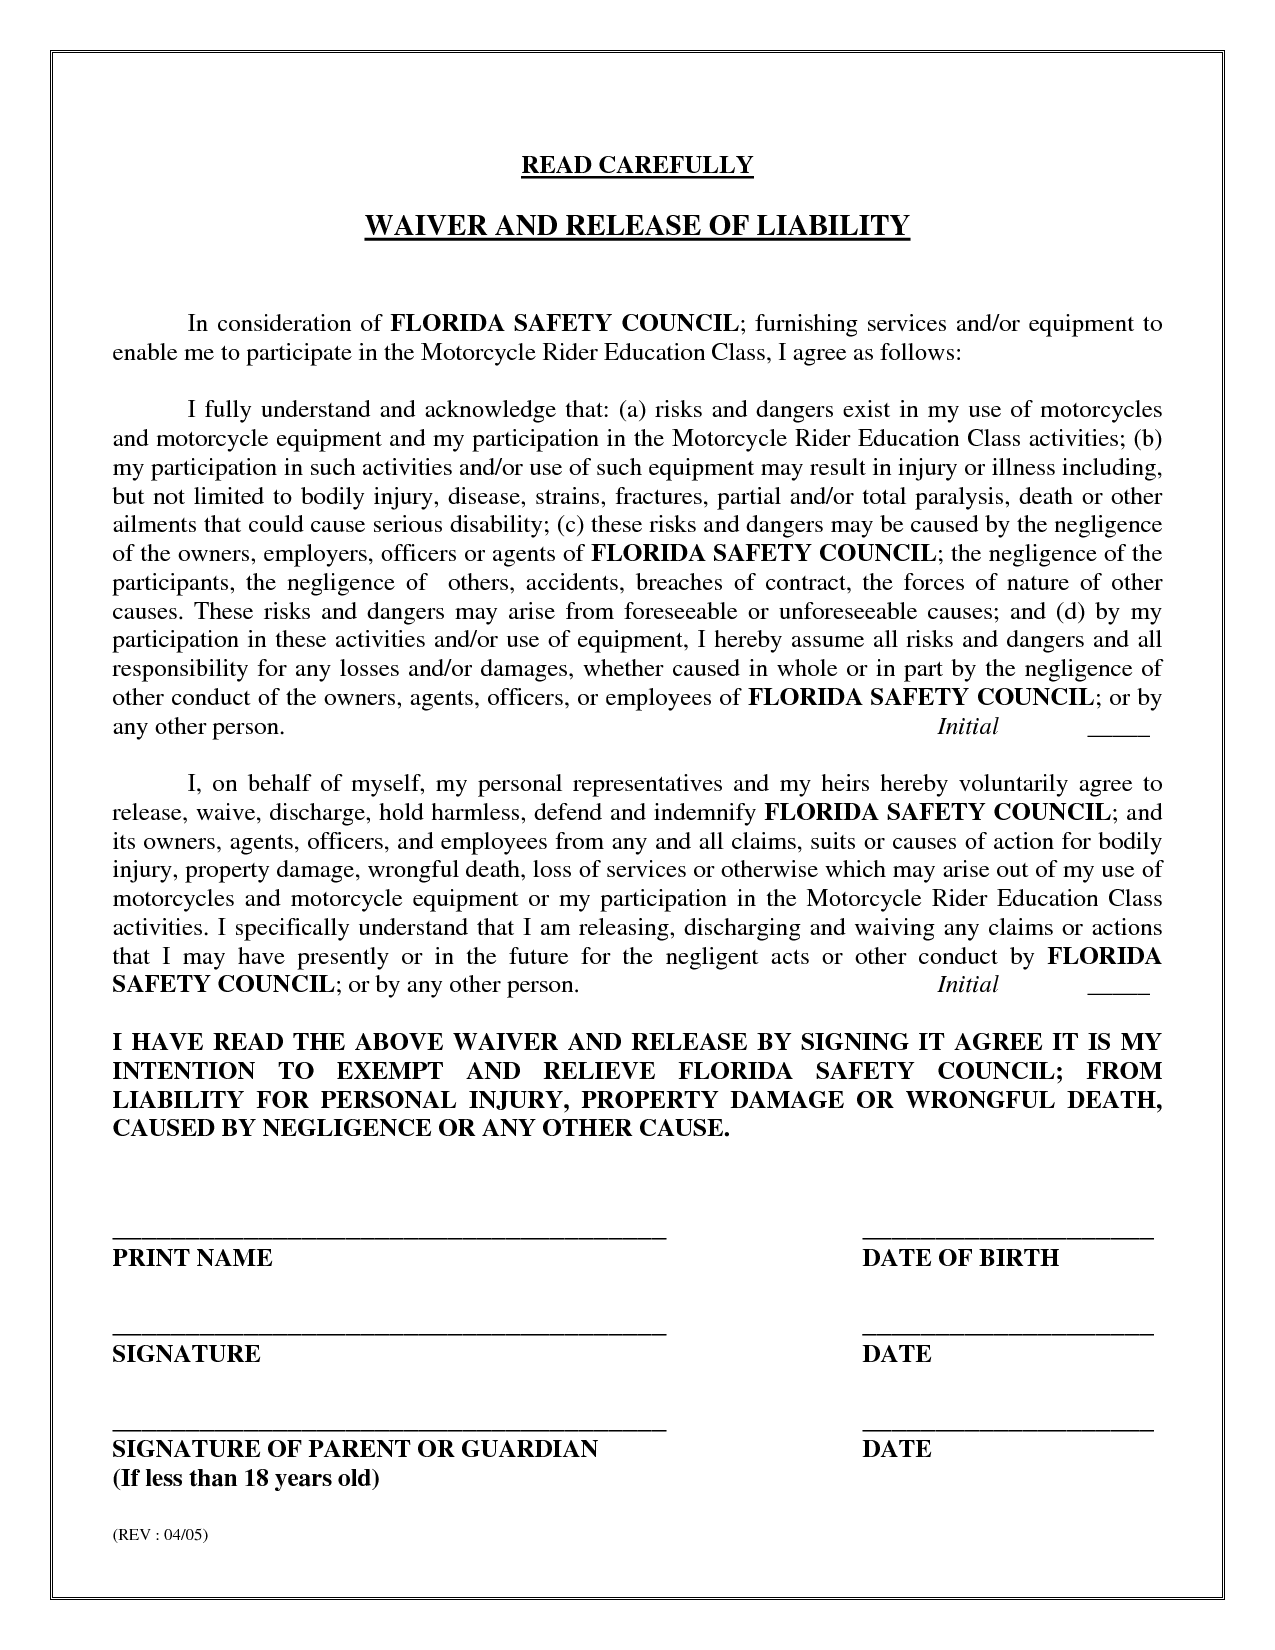 new-hampshire-liability-waiver-for-hunting-liability-release-form-for